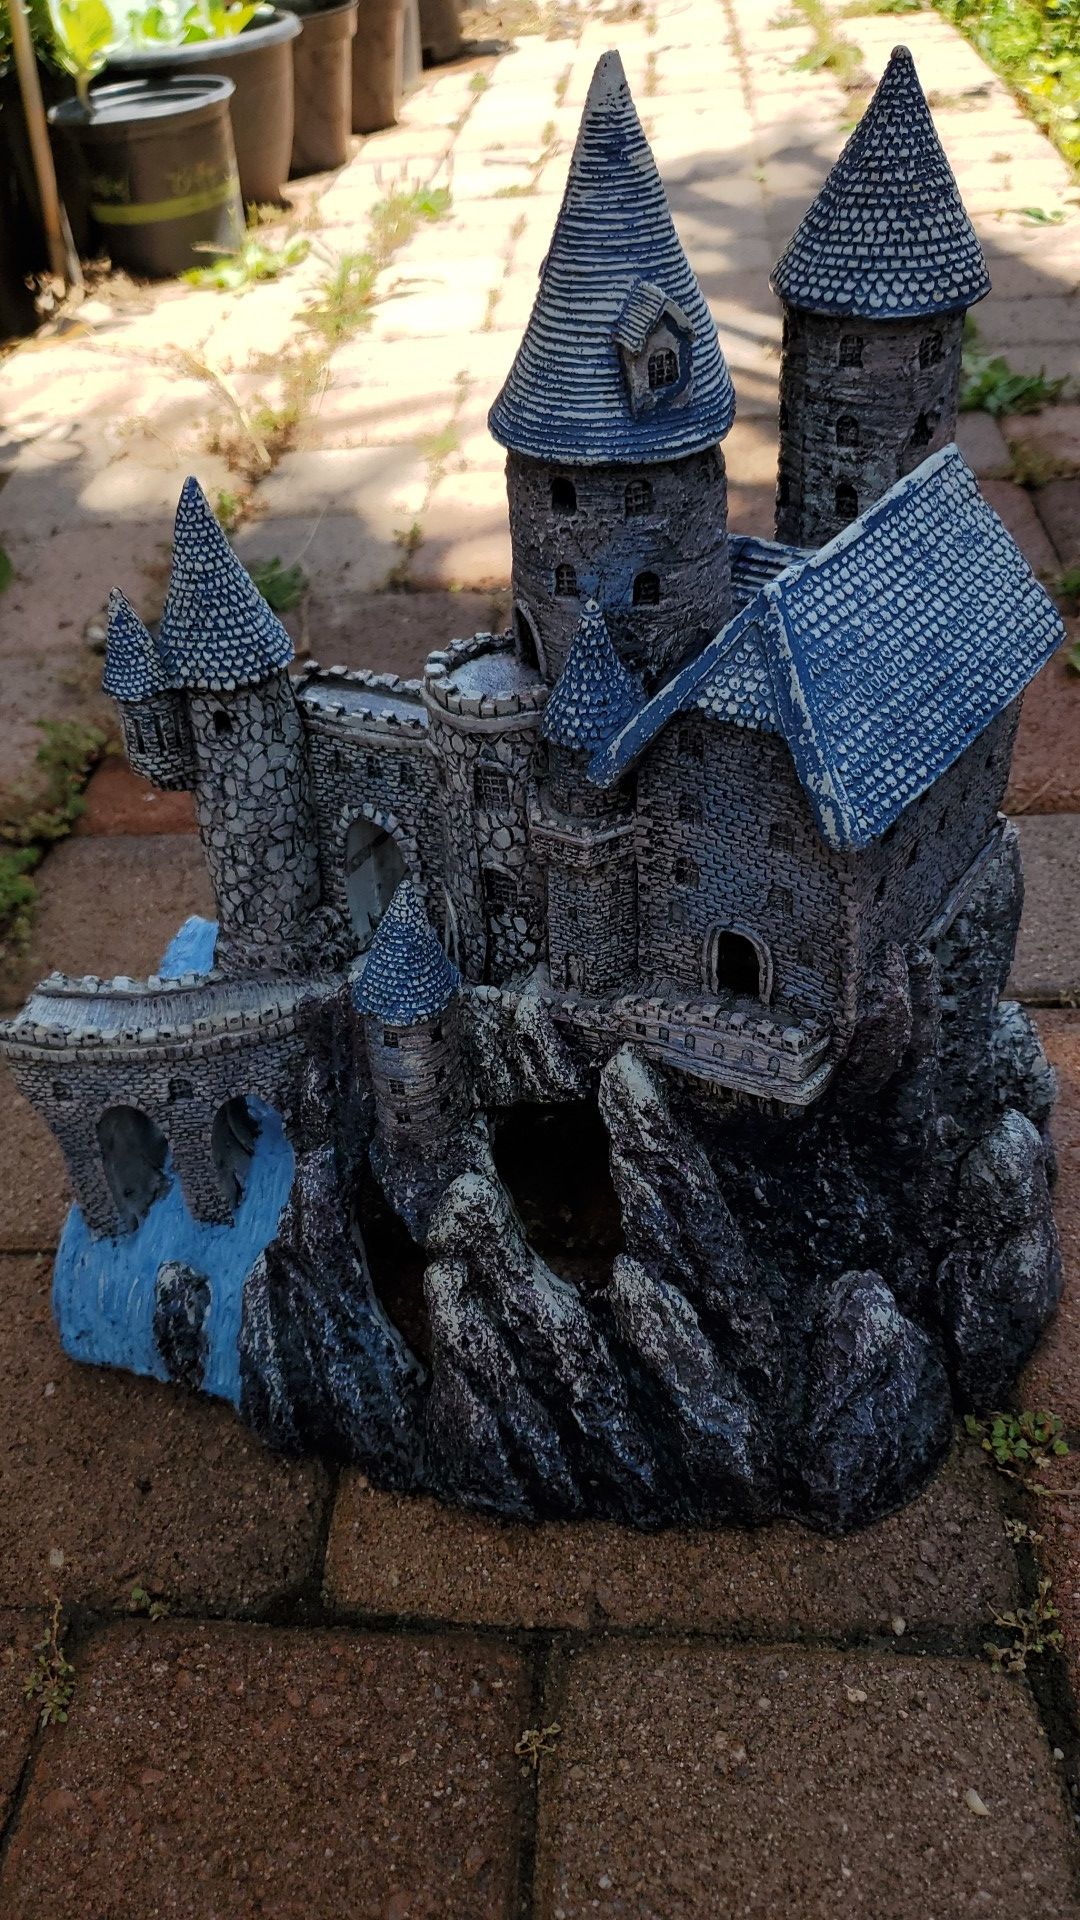 Castle for fish tank